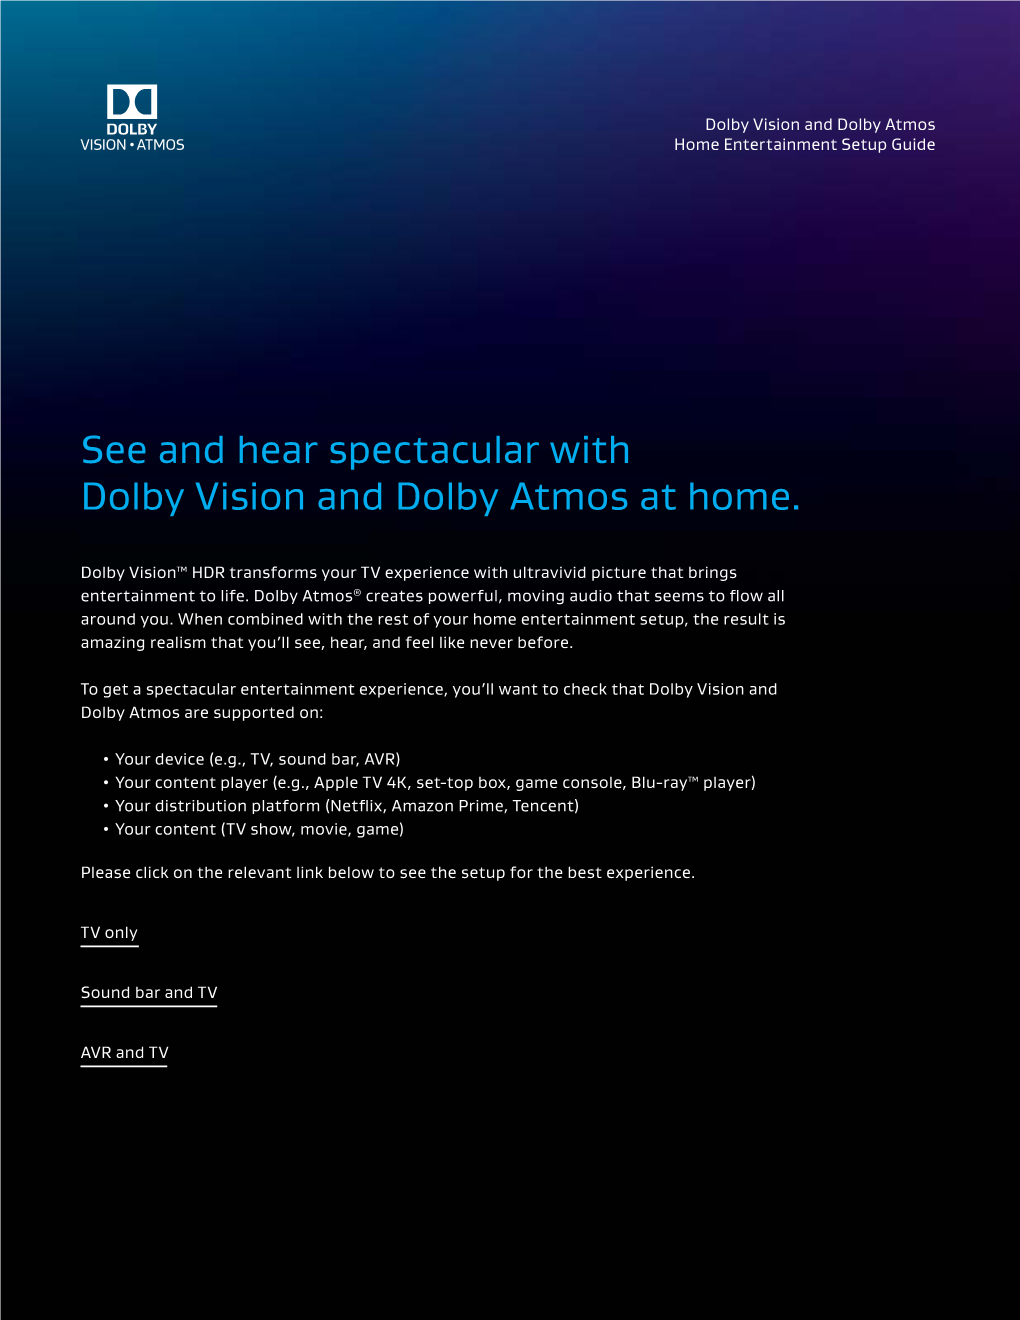 See and Hear Spectacular with Dolby Vision and Dolby Atmos at Home